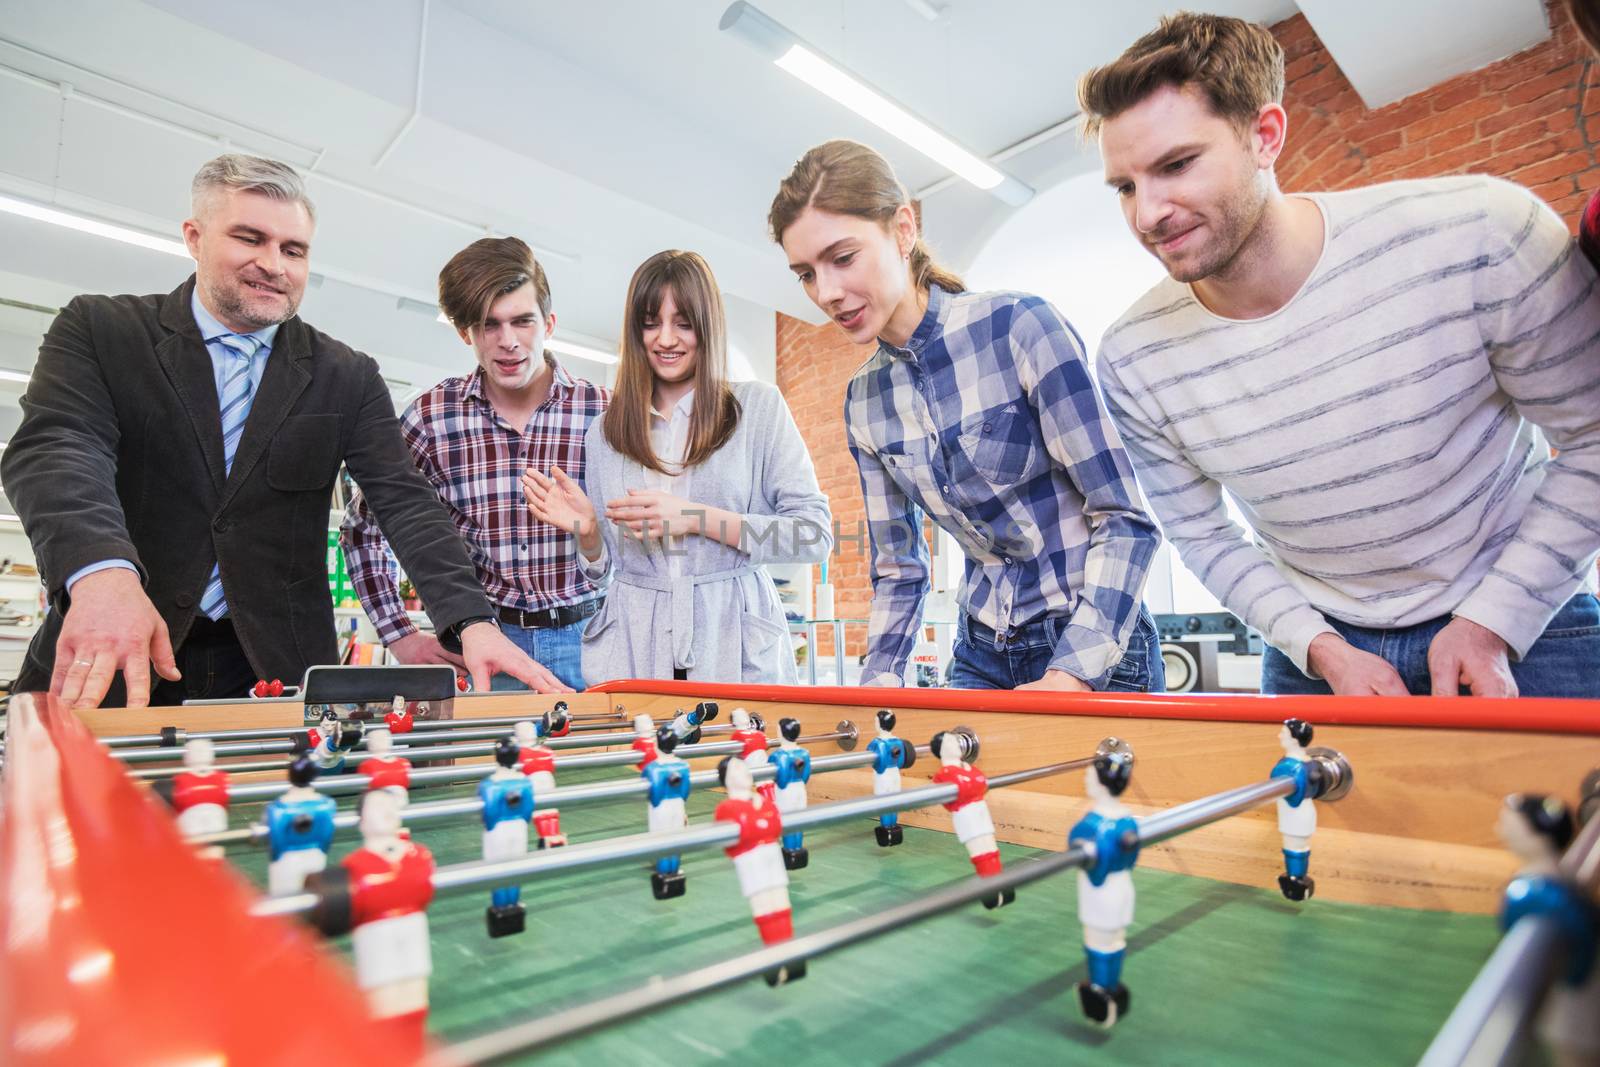 Group of happy people playing table soccer together